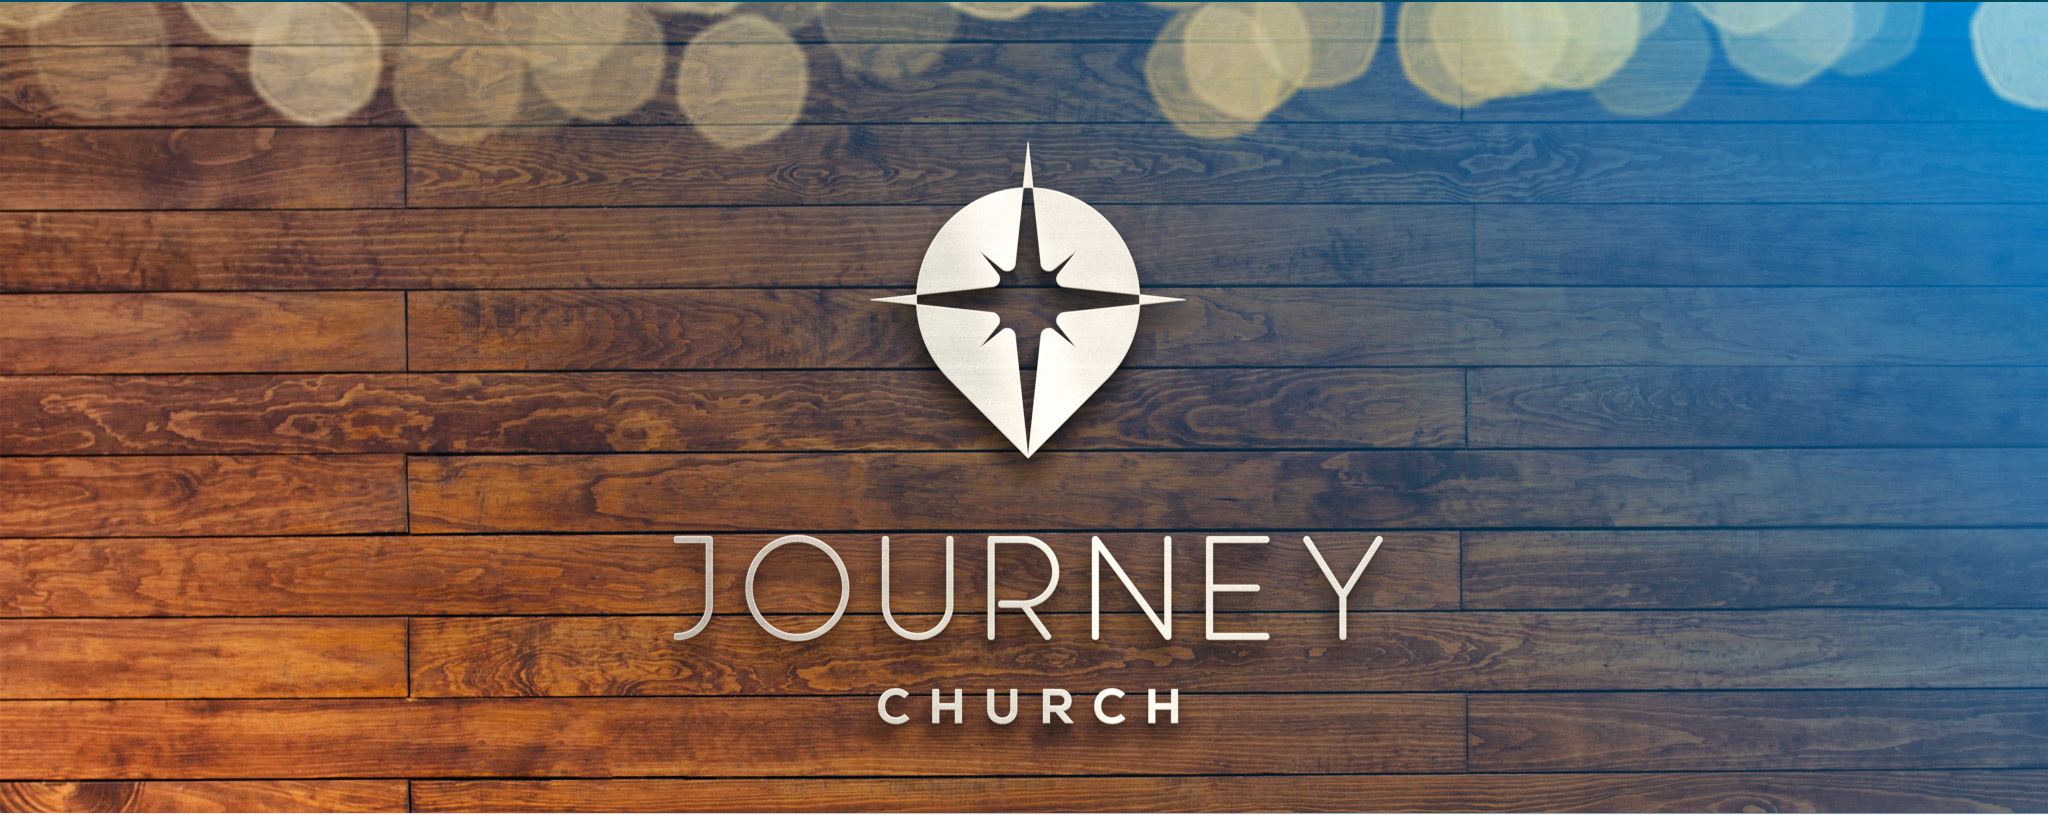 journey christian church about